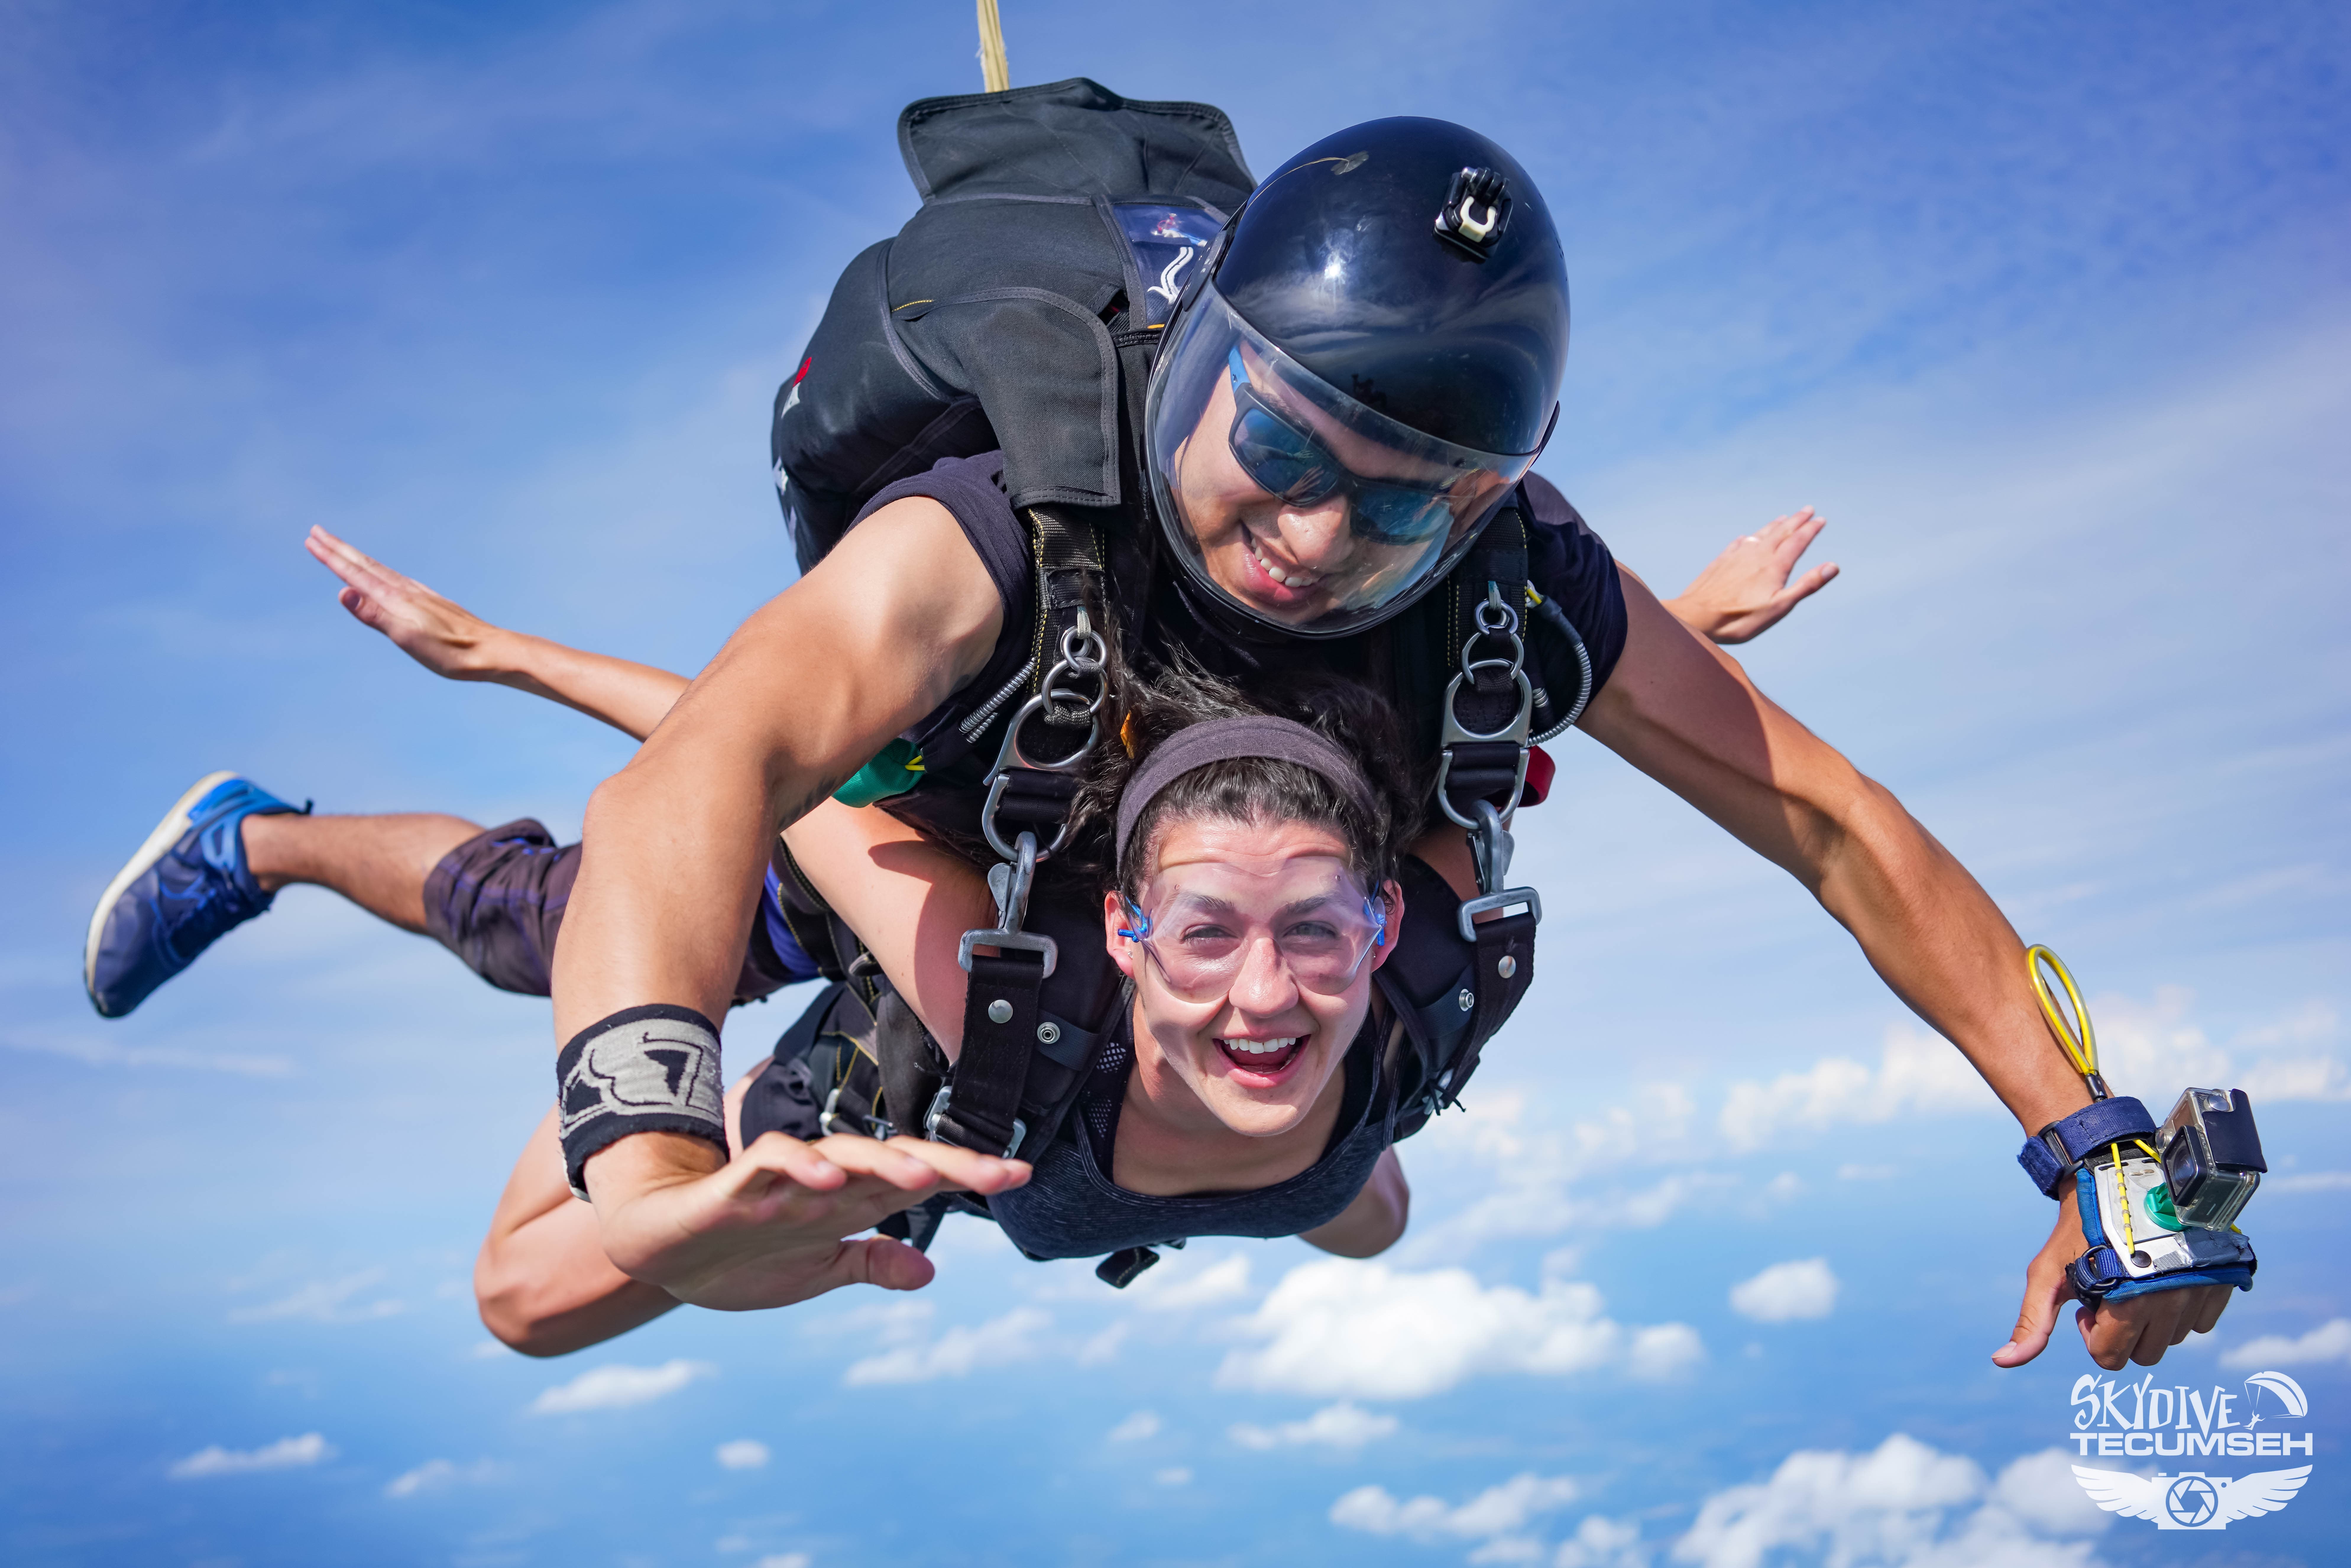 is it hard to breathe while skydiving